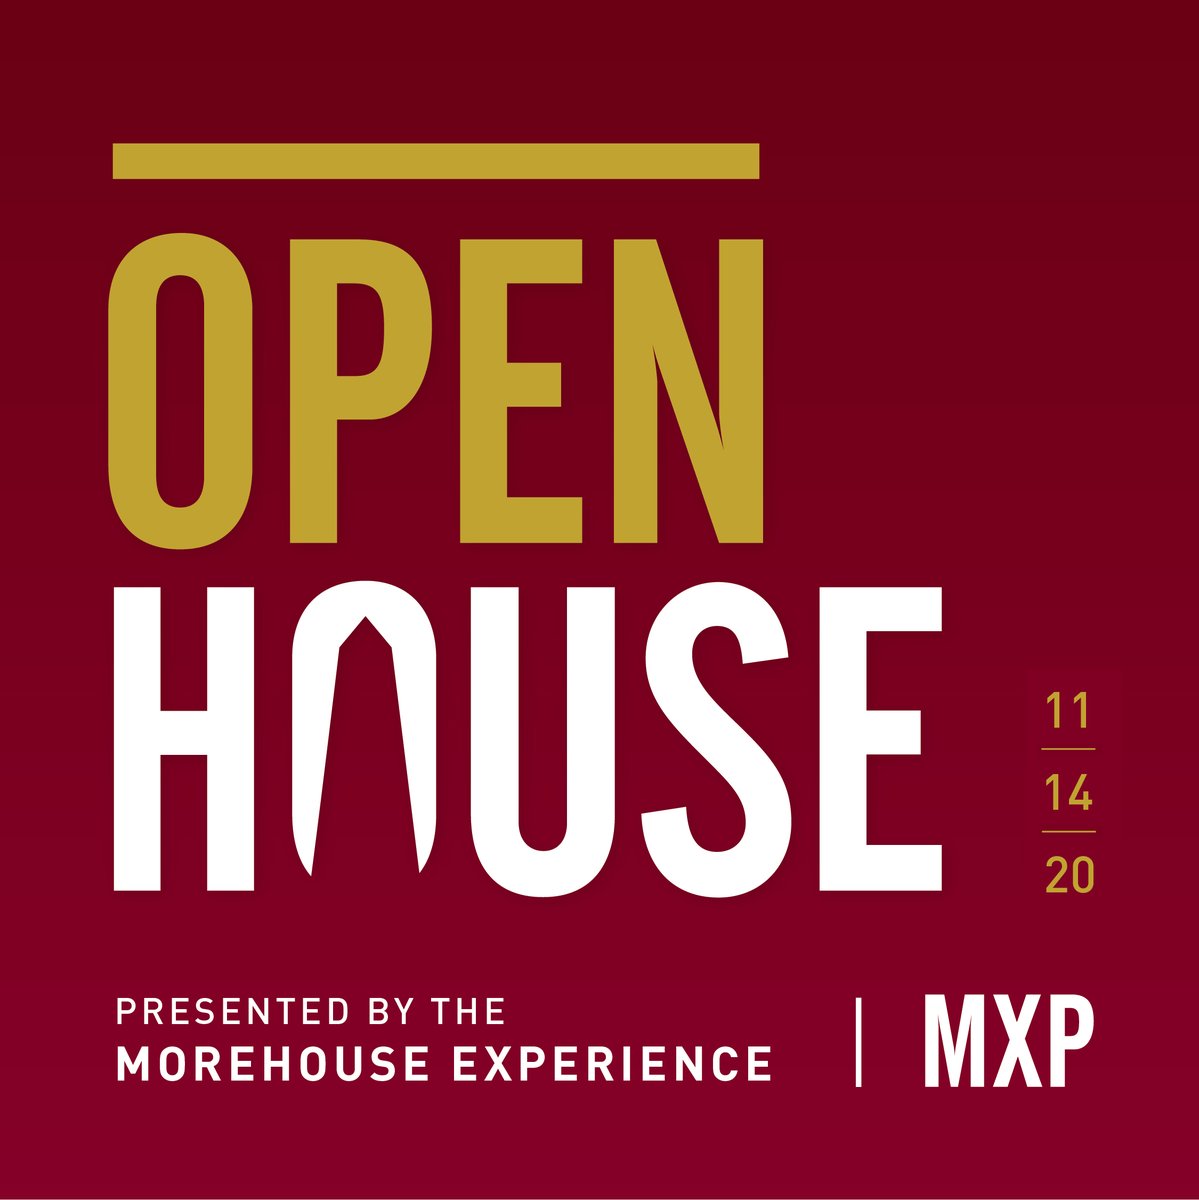 Want to be a Morehouse Man? Join our virtual Open House at 1 p.m. EST on Saturday, Nov. 14. Register at bit.ly/38ybQfN #morehouse #morehousecollege #HBCU #blackcollege #morehouseman